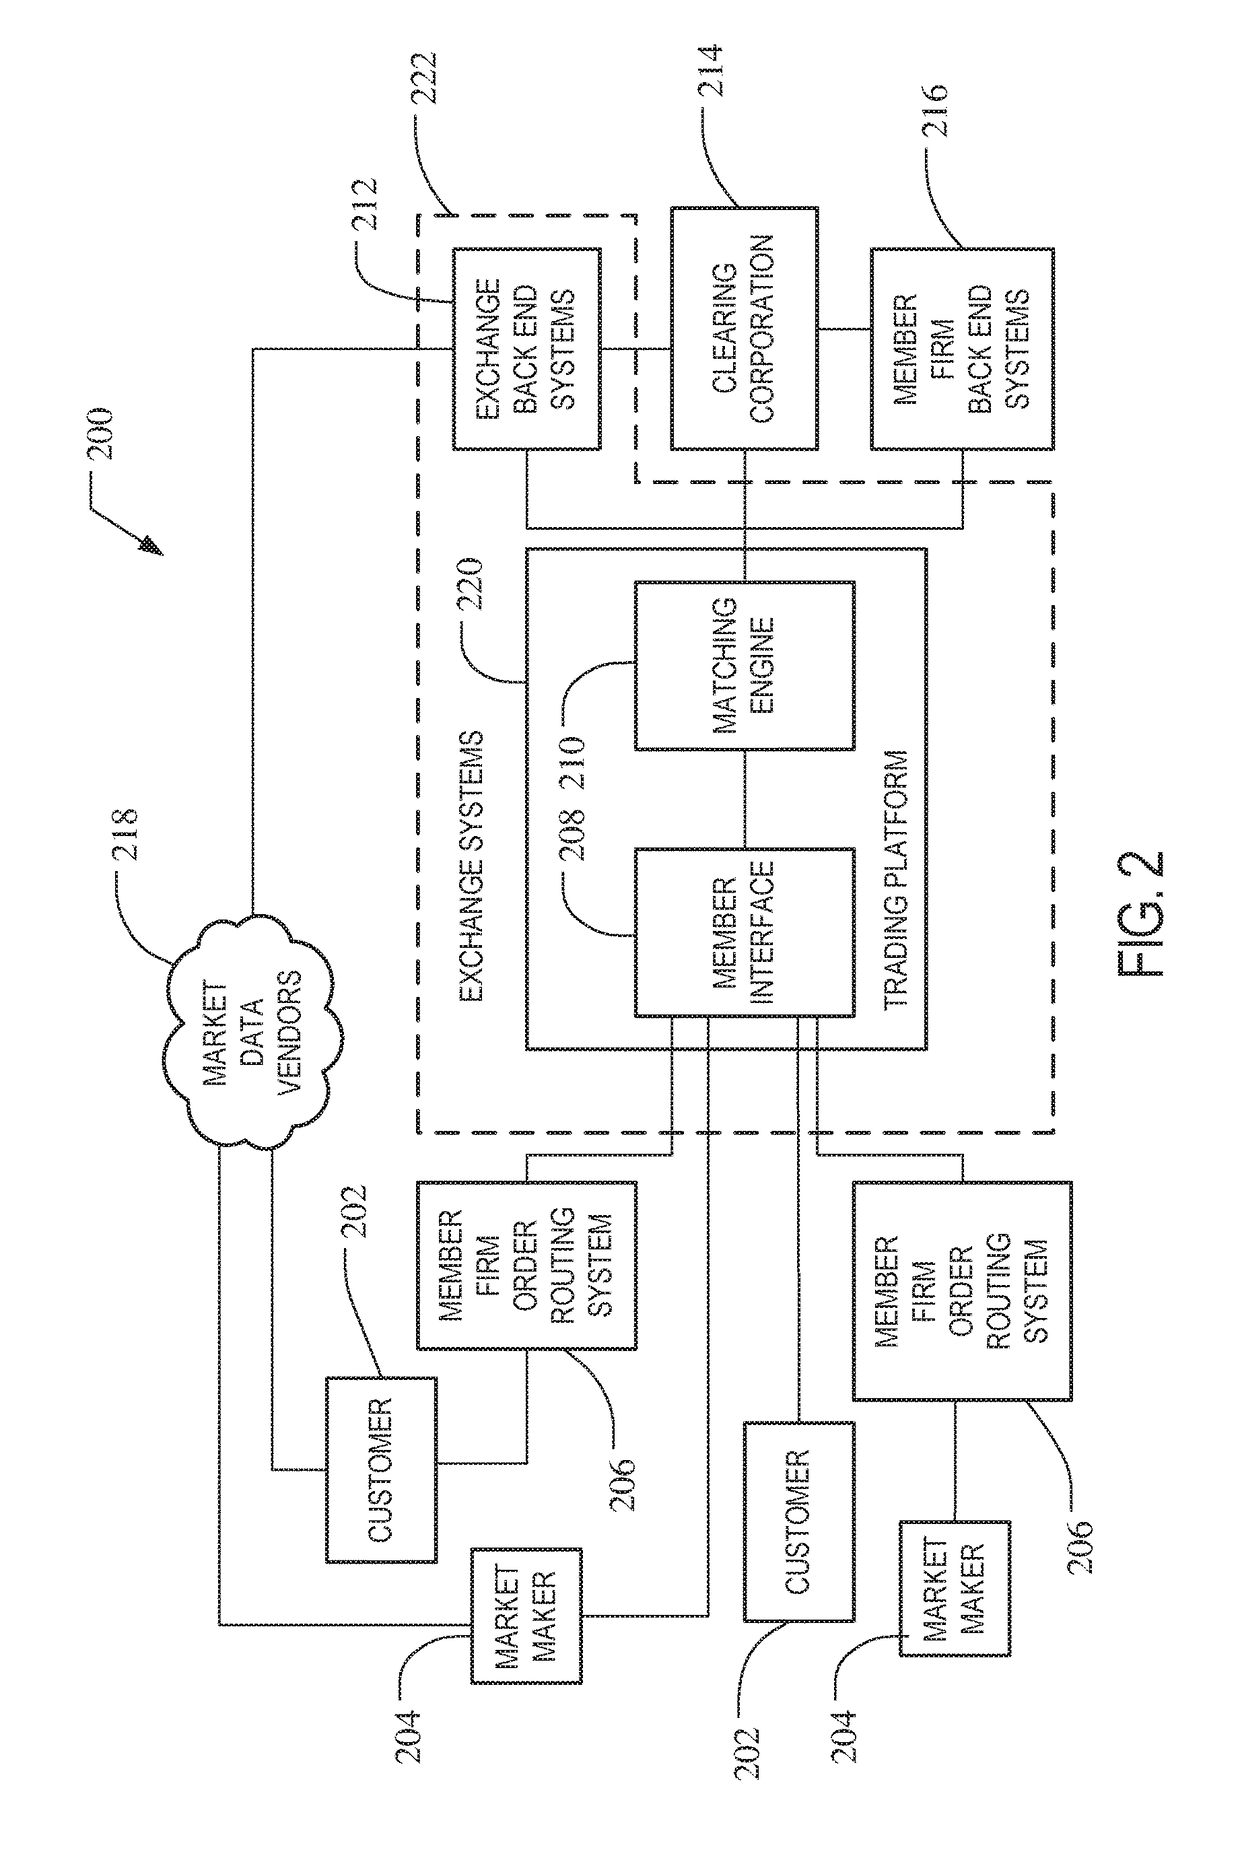 Methods and systems for creating a credit volatility index and trading derivative products based thereon